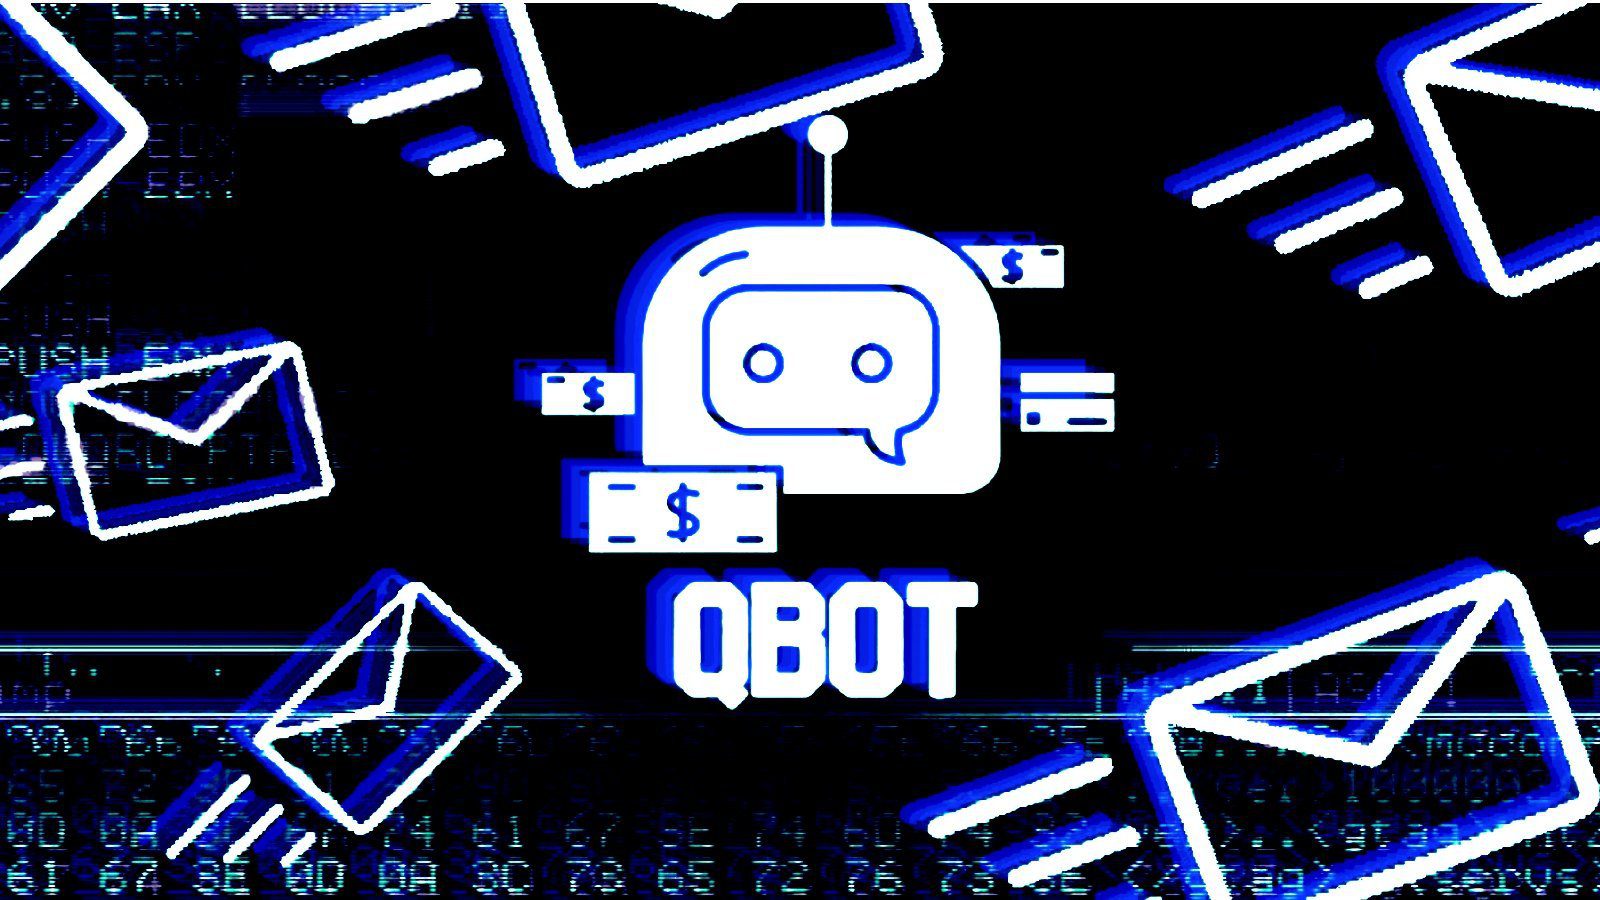 Attackers use SVG files to smuggle QBot malware onto Windows systems